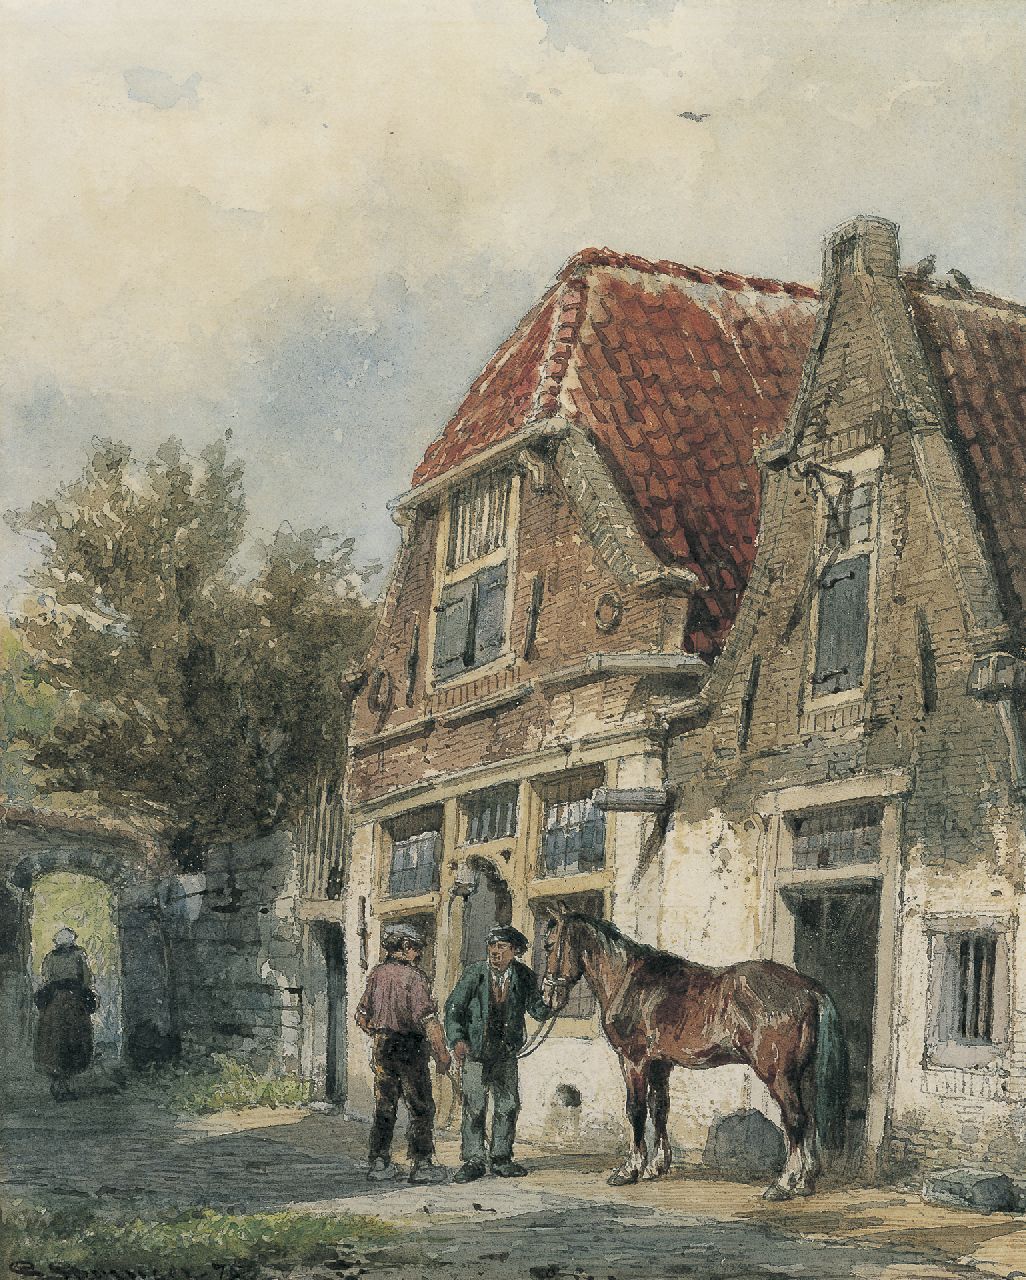 Springer C.  | Cornelis Springer, Stable boys holding their horse, pencil and watercolour on paper 24.6 x 19.8 cm, signed l.l. and dated '75